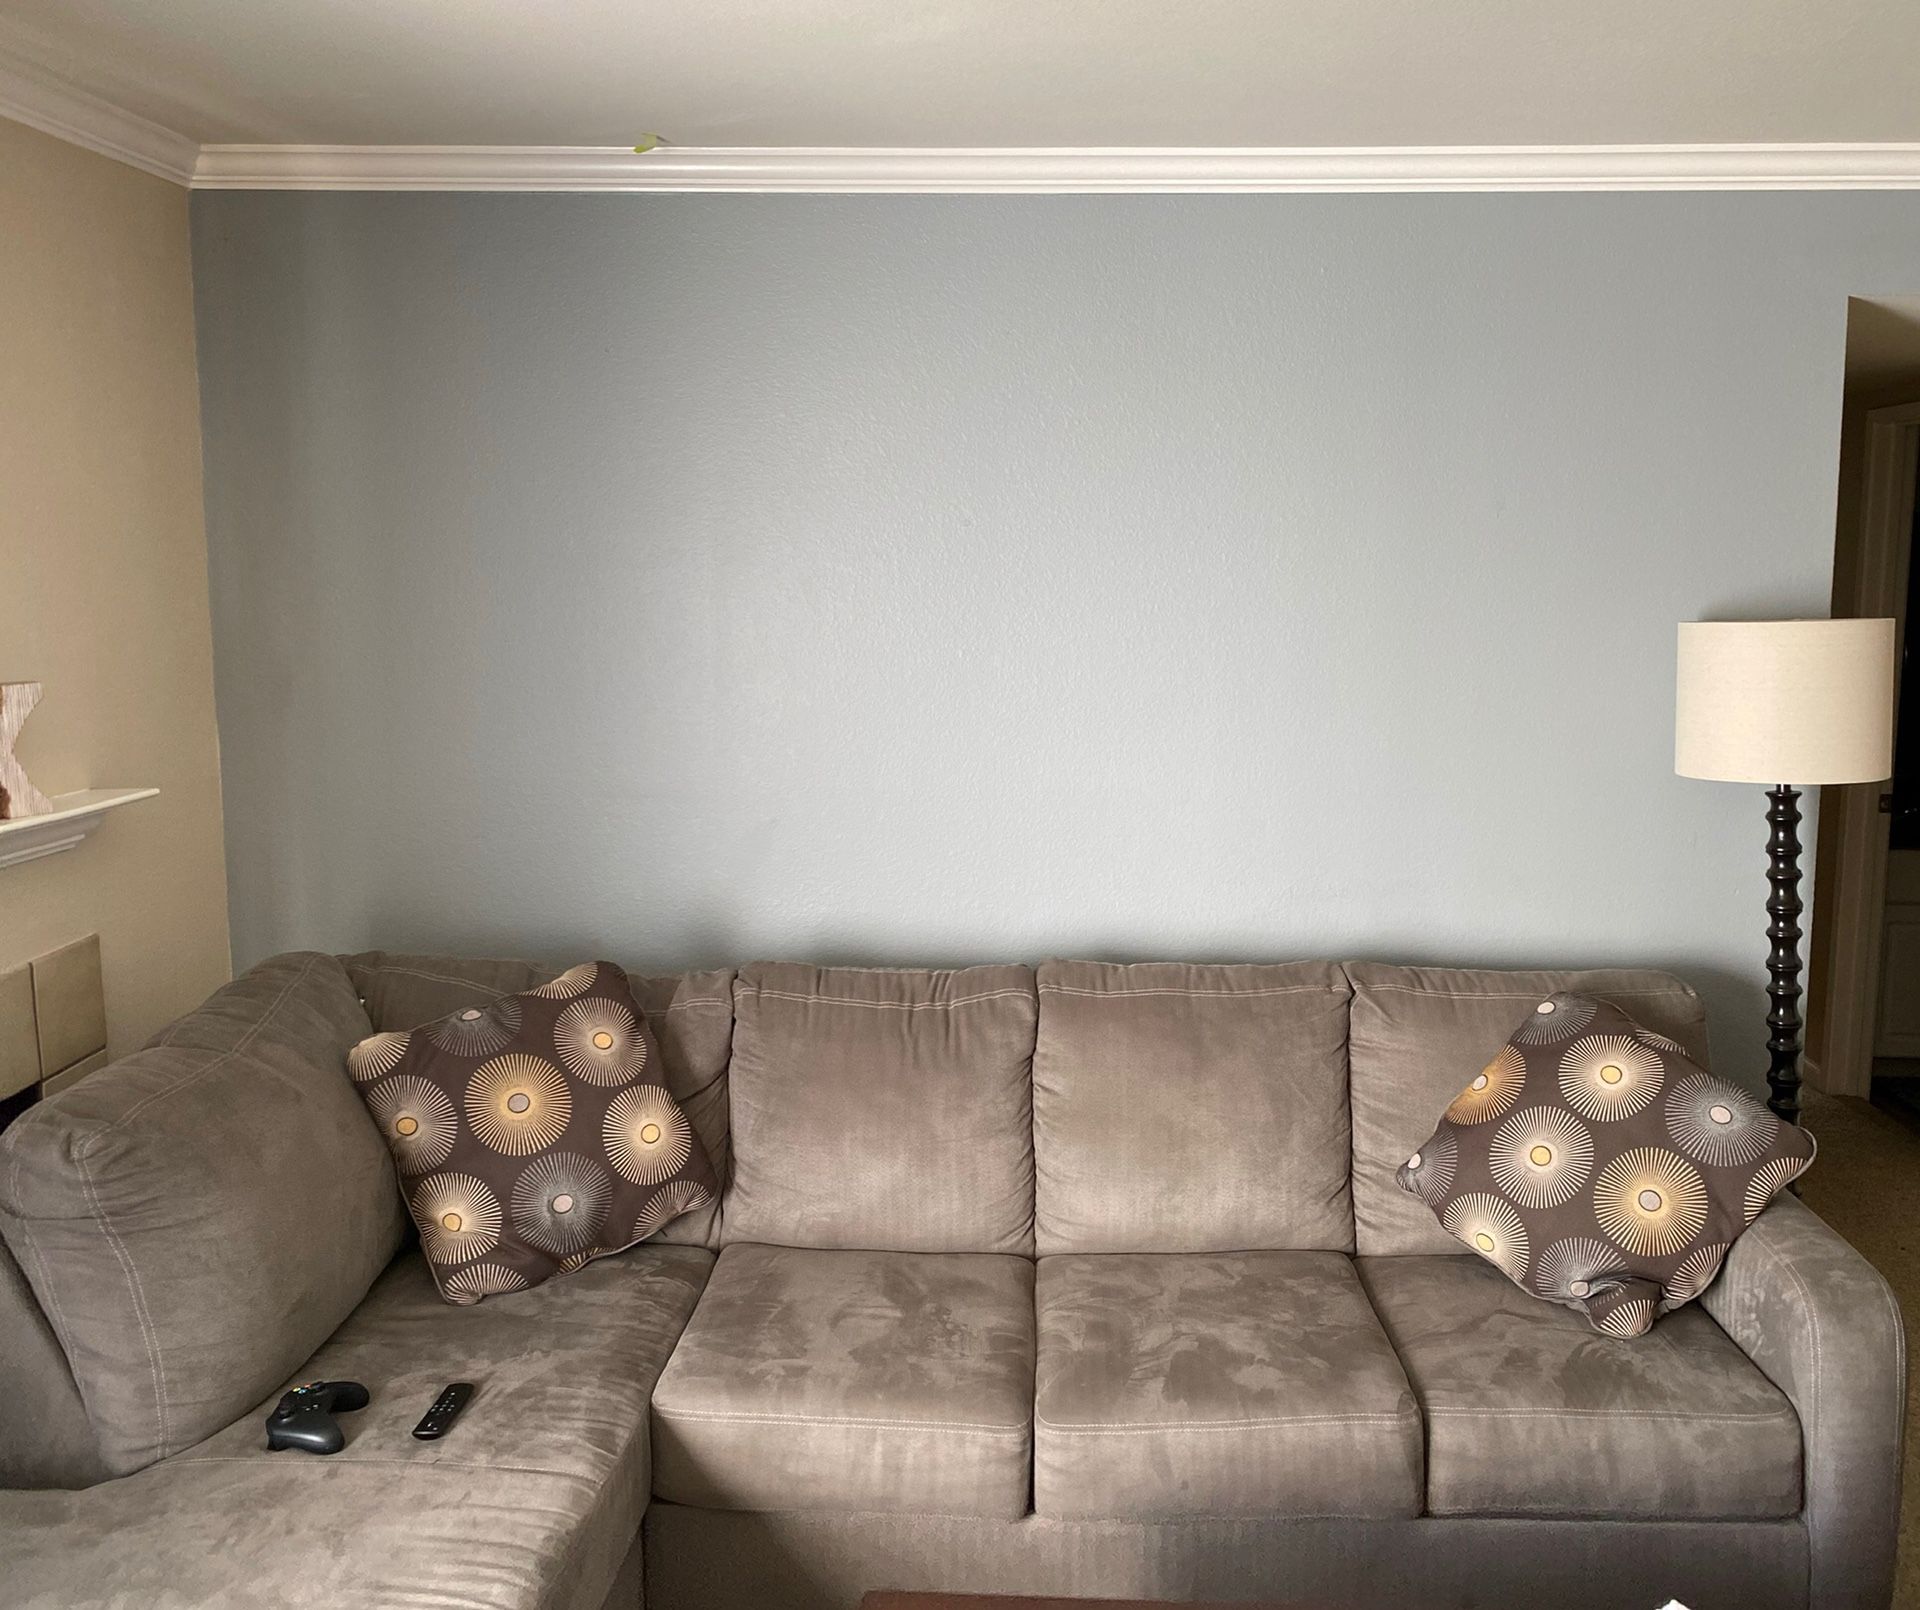 Grey sofa/couch “sectional” with chaise